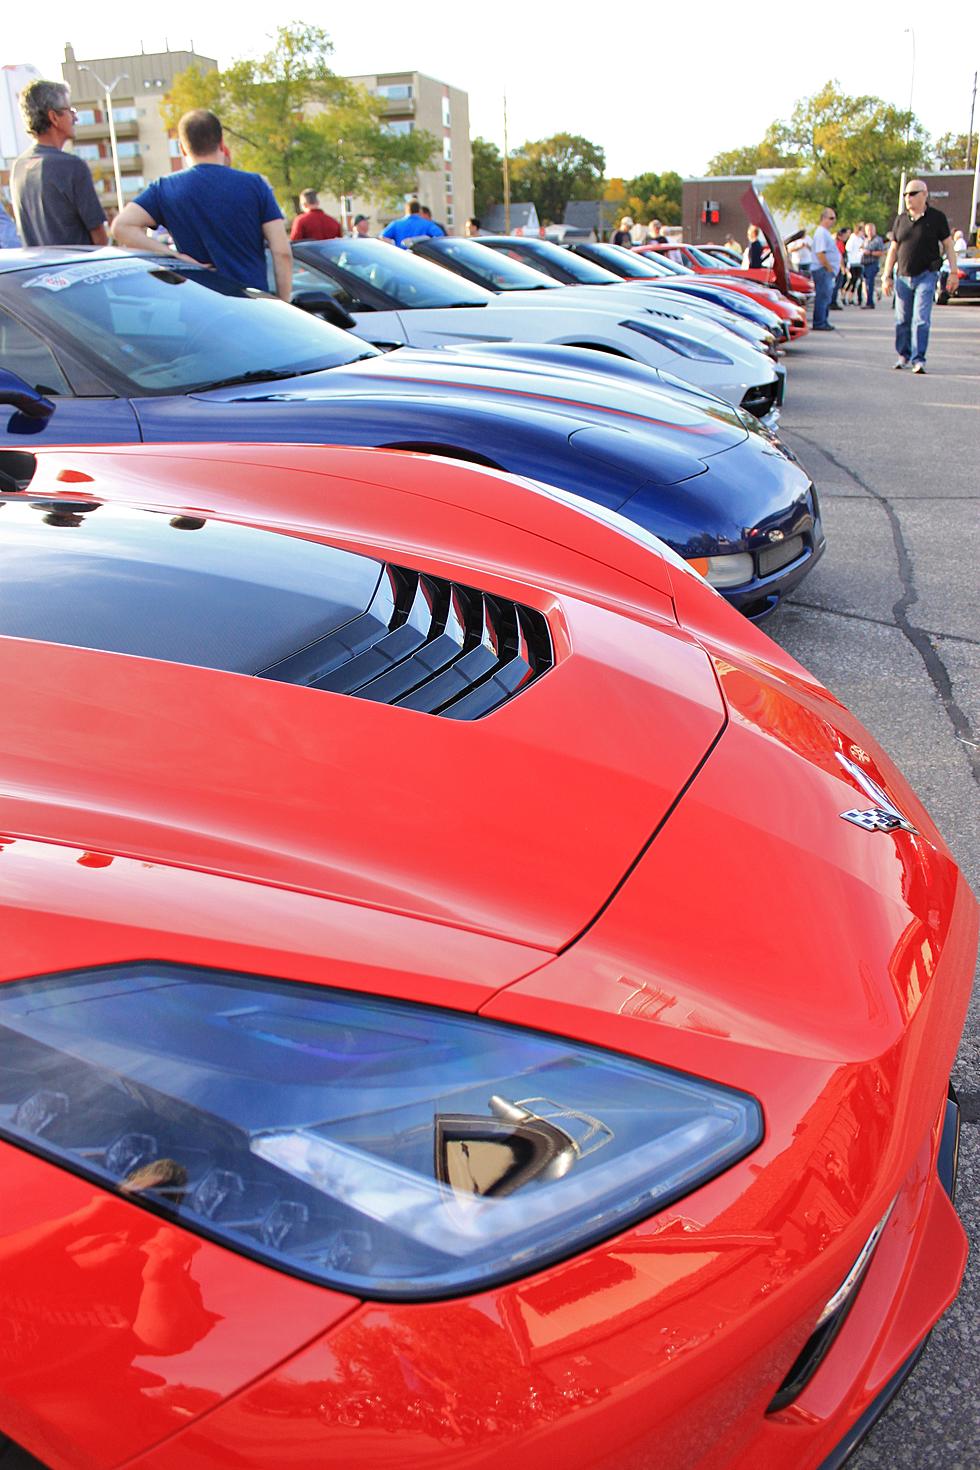 Duck Creek Tire’s Car Show & Charity is Saturday in Bettendorf